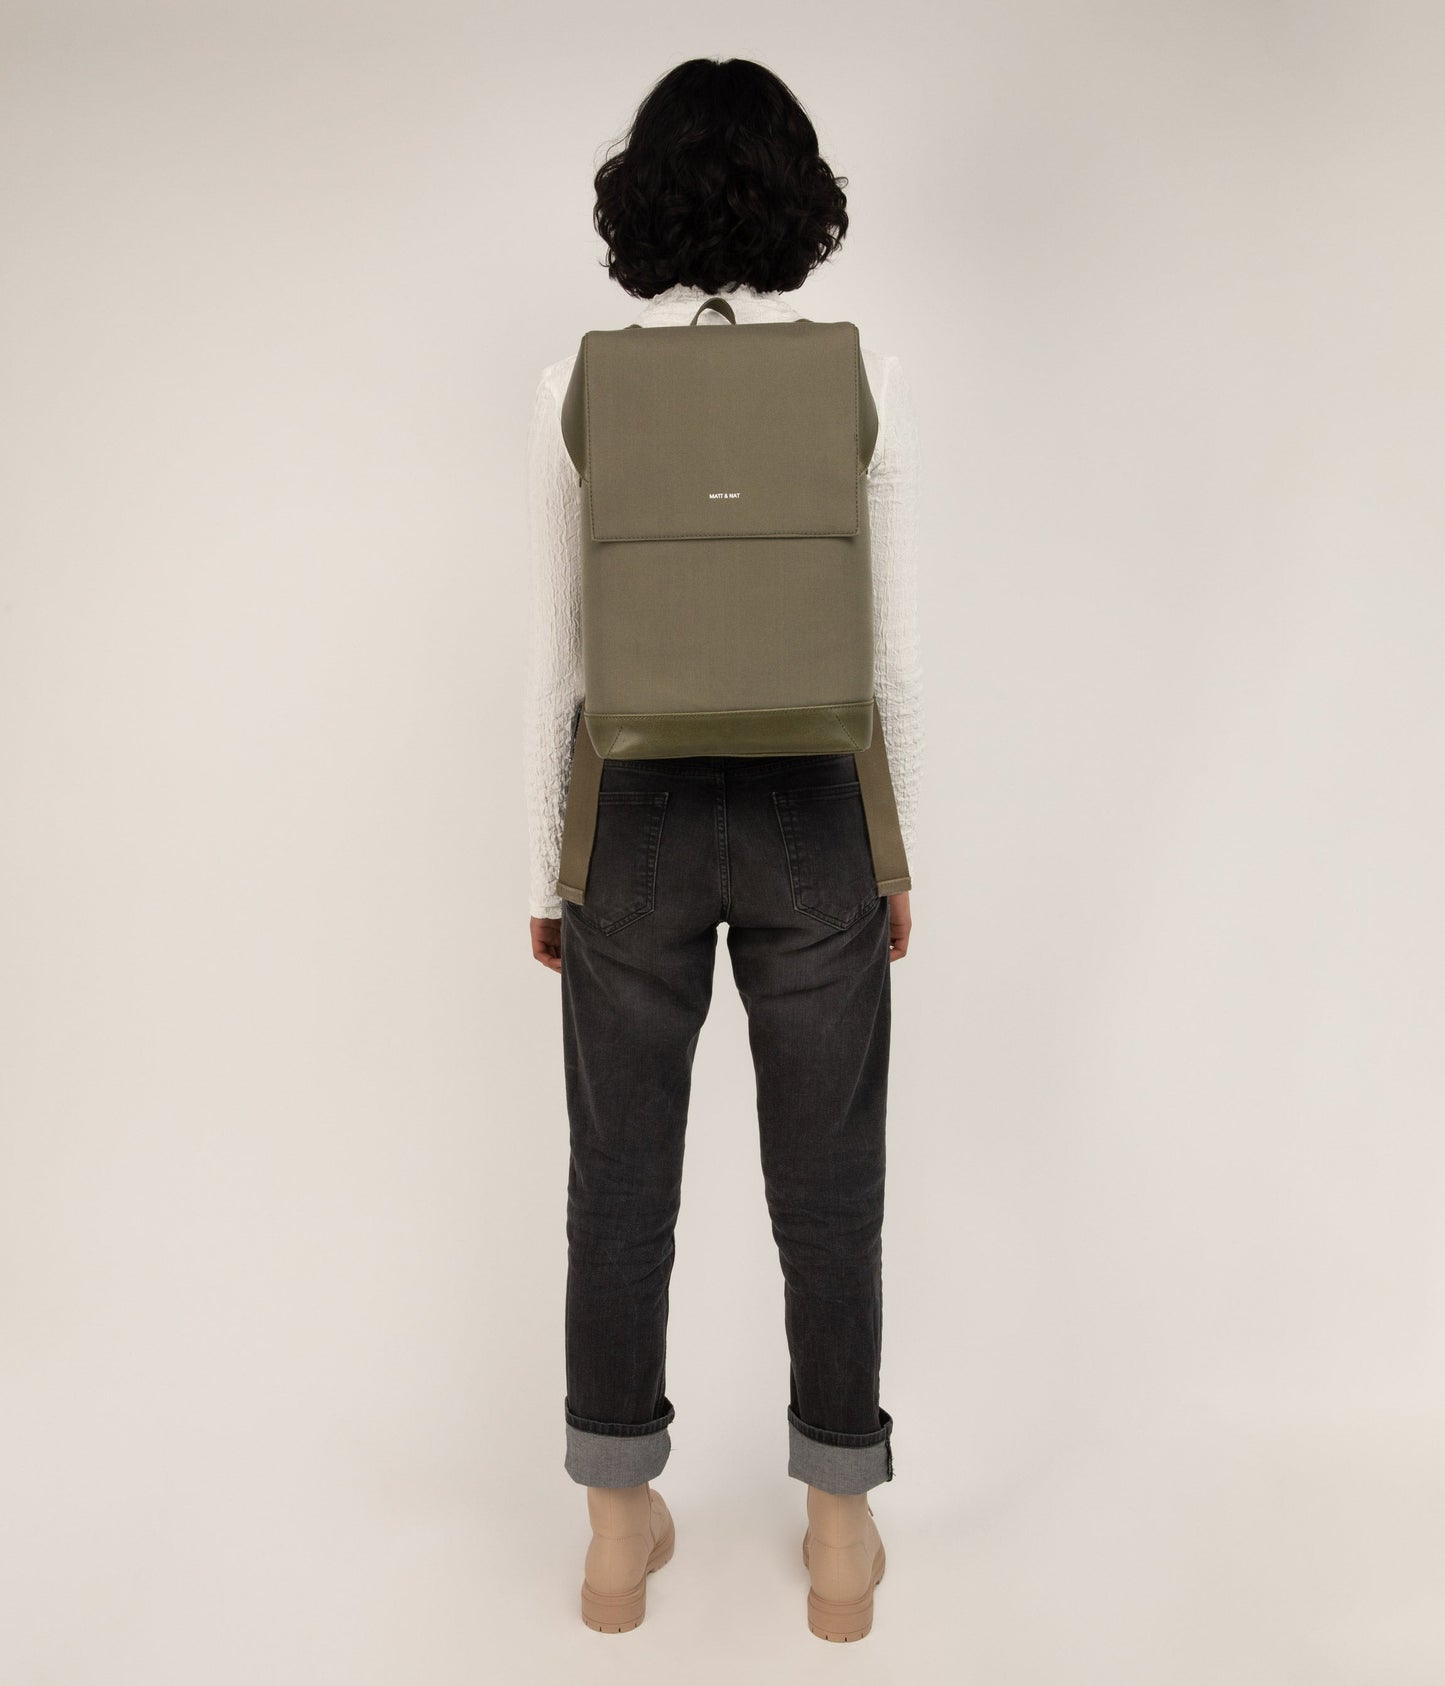 HOXTON Vegan Backpack - Canvas | Color: Brown - variant::chili